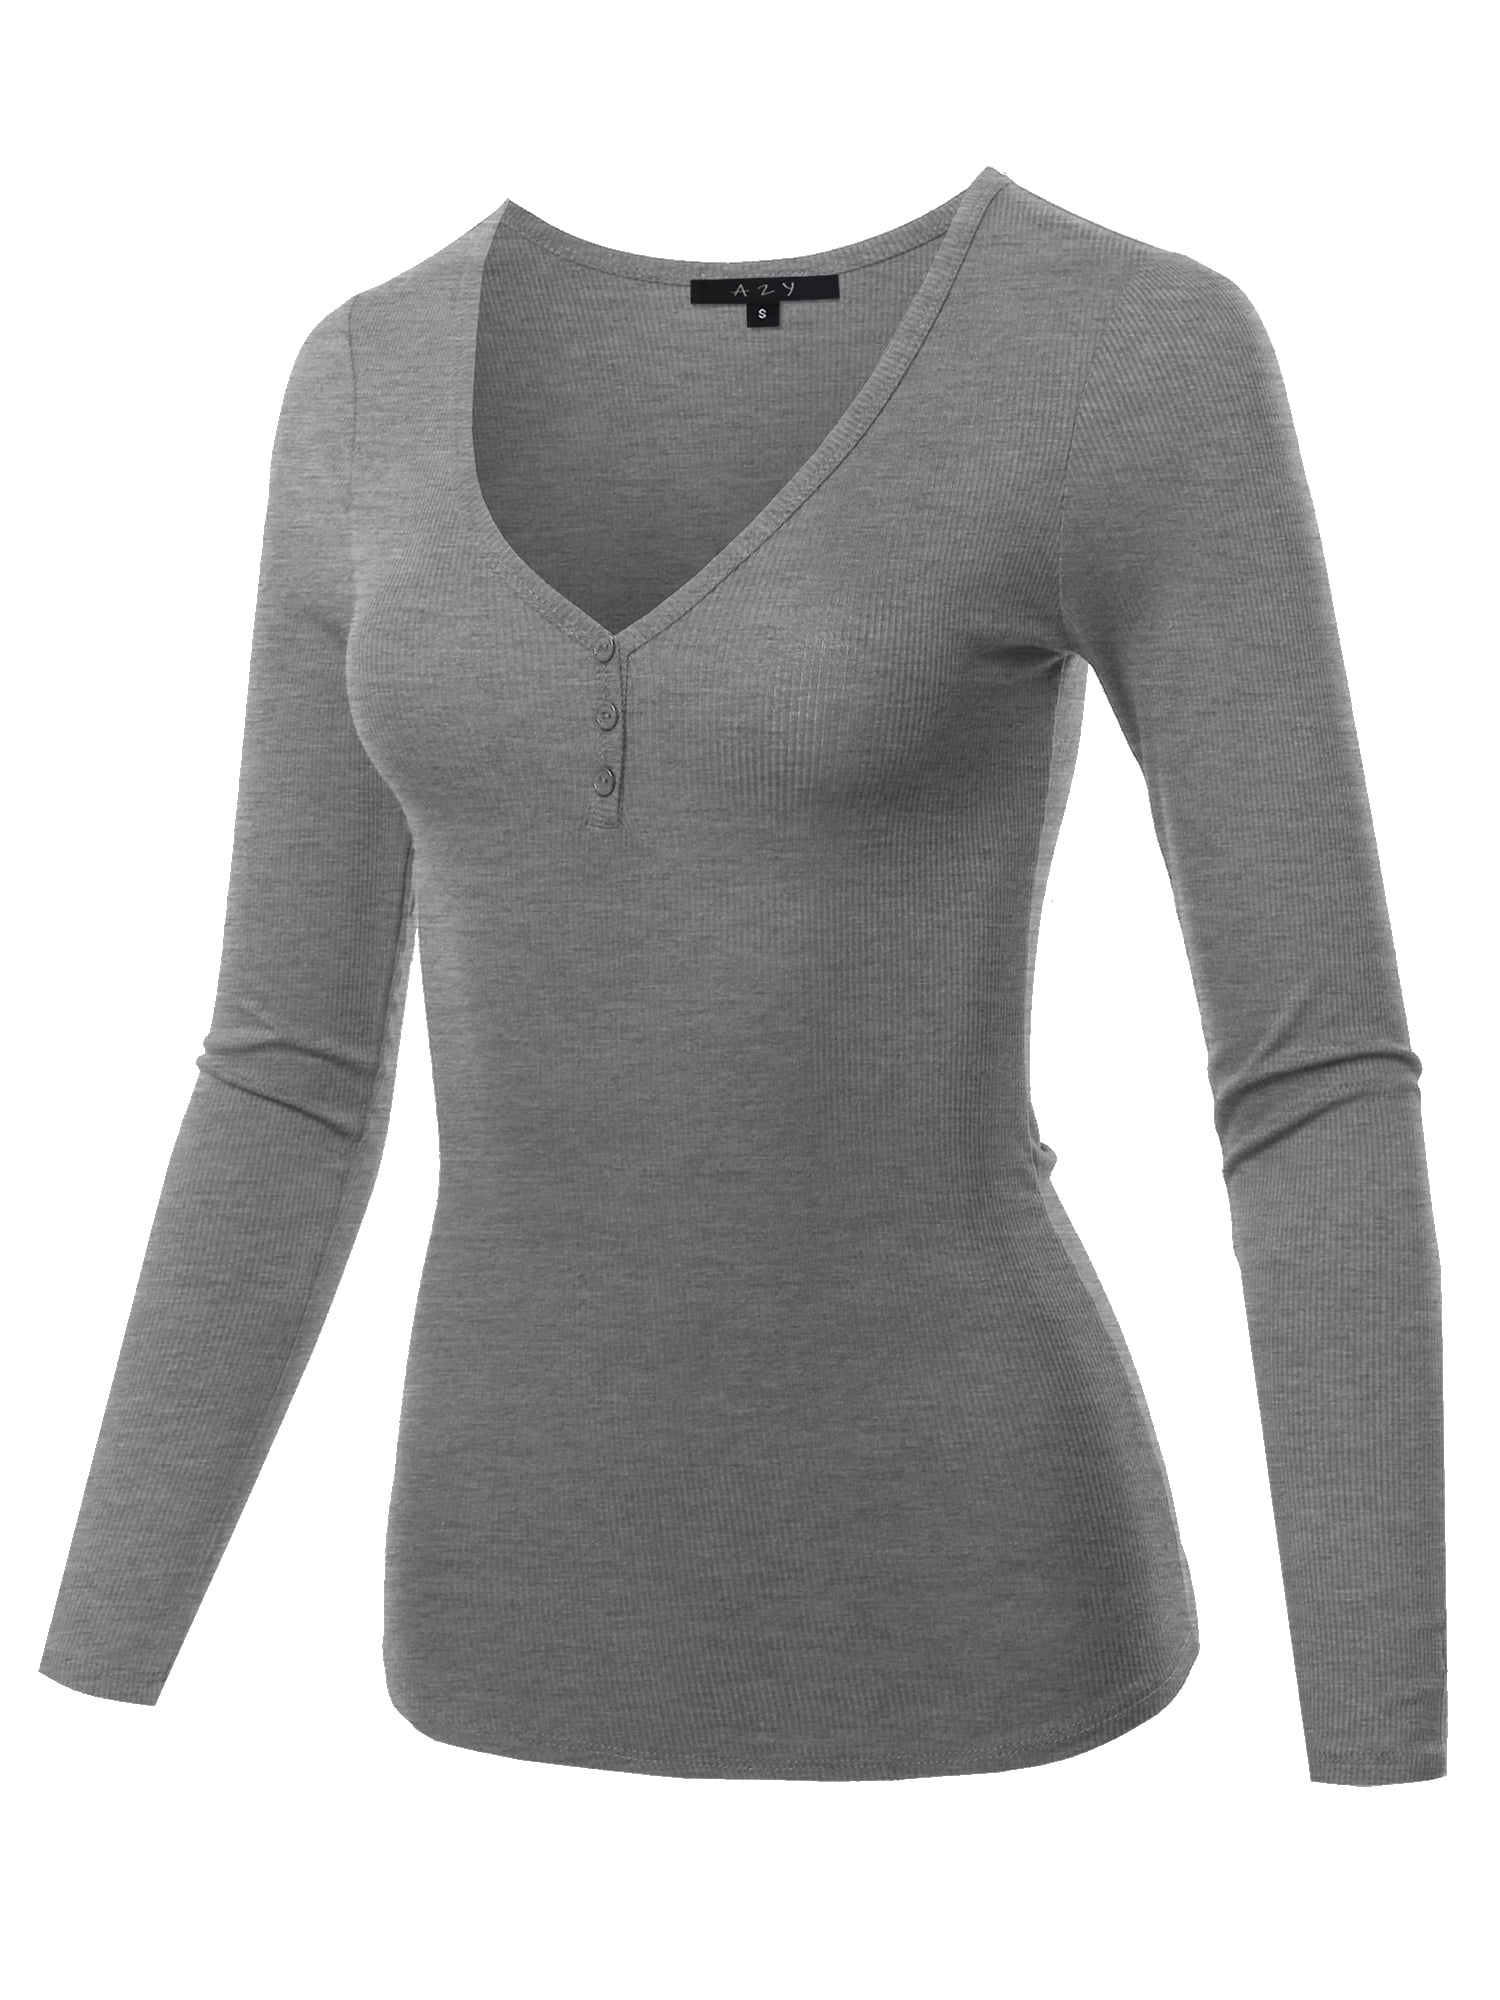 A2Y Women's Lightweight Long Sleeve V-Neck Ribbed Henley Tops Tees Mid ...